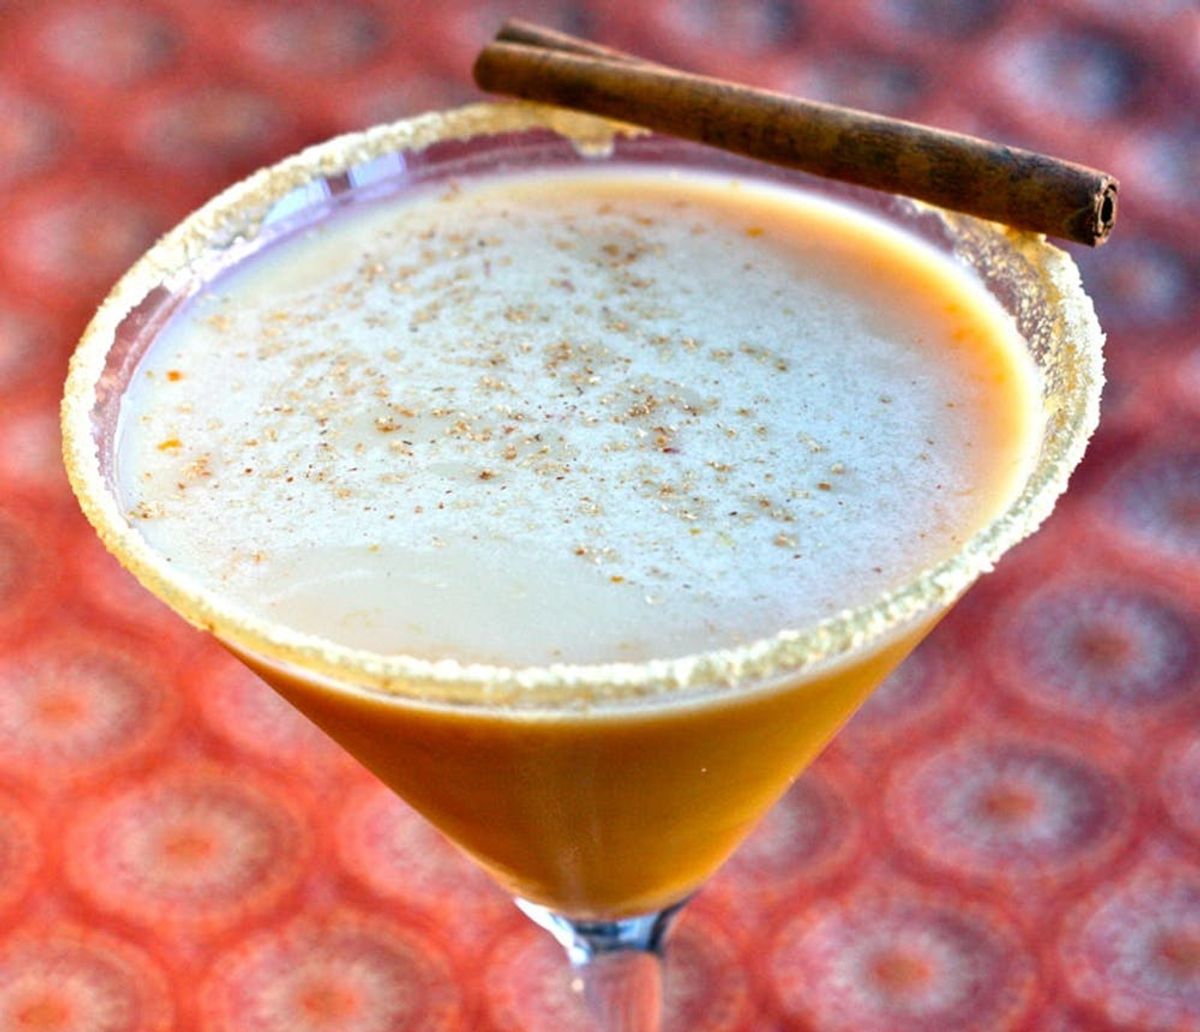 Presenting the Pumpkintini: A Tipsy Take on the Pumpkin Spice Latte